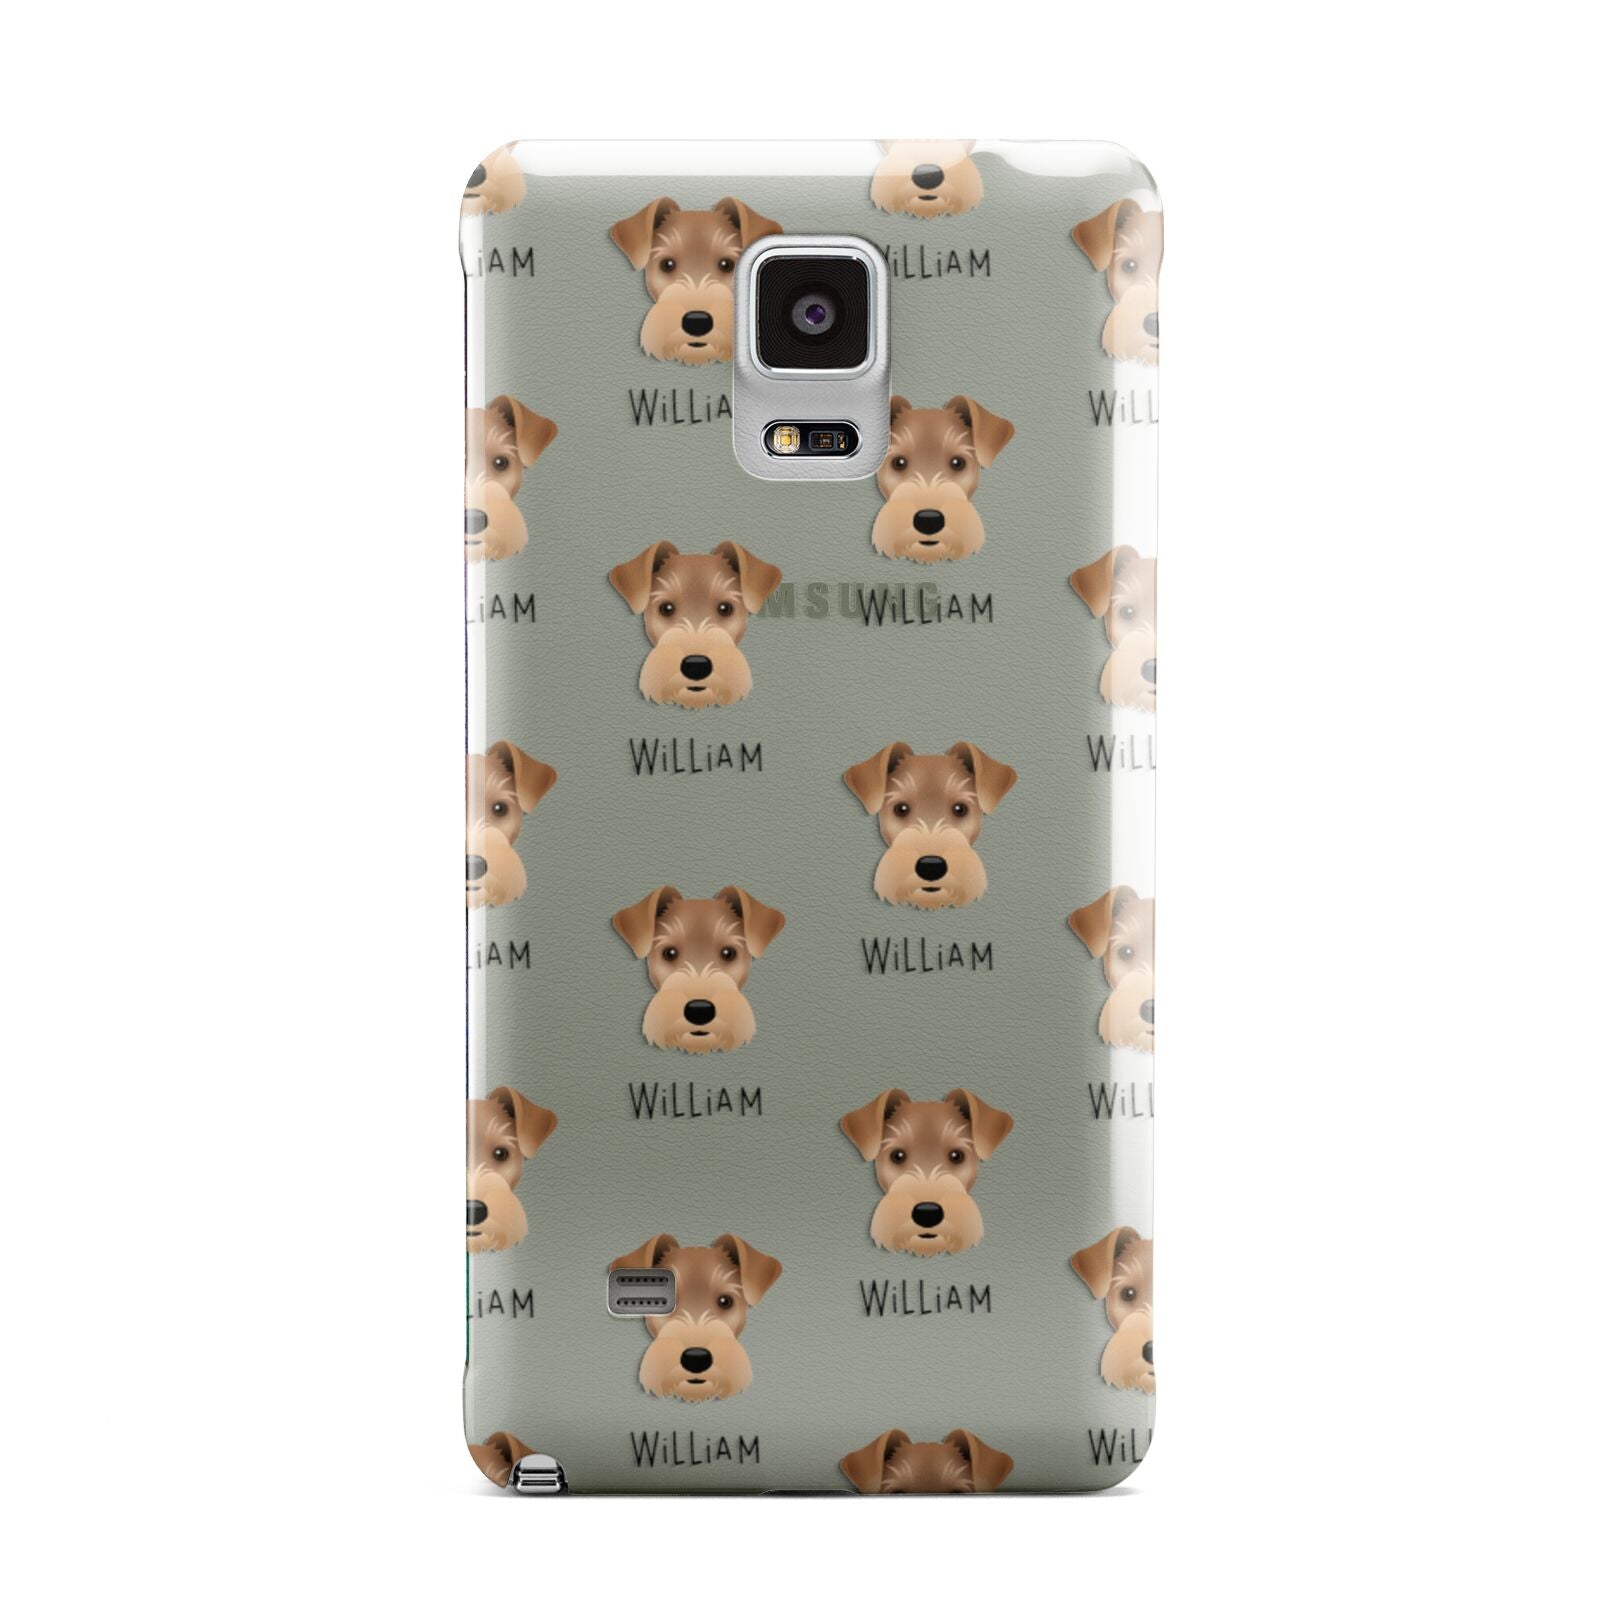 Welsh Terrier Icon with Name Samsung Galaxy Note 4 Case